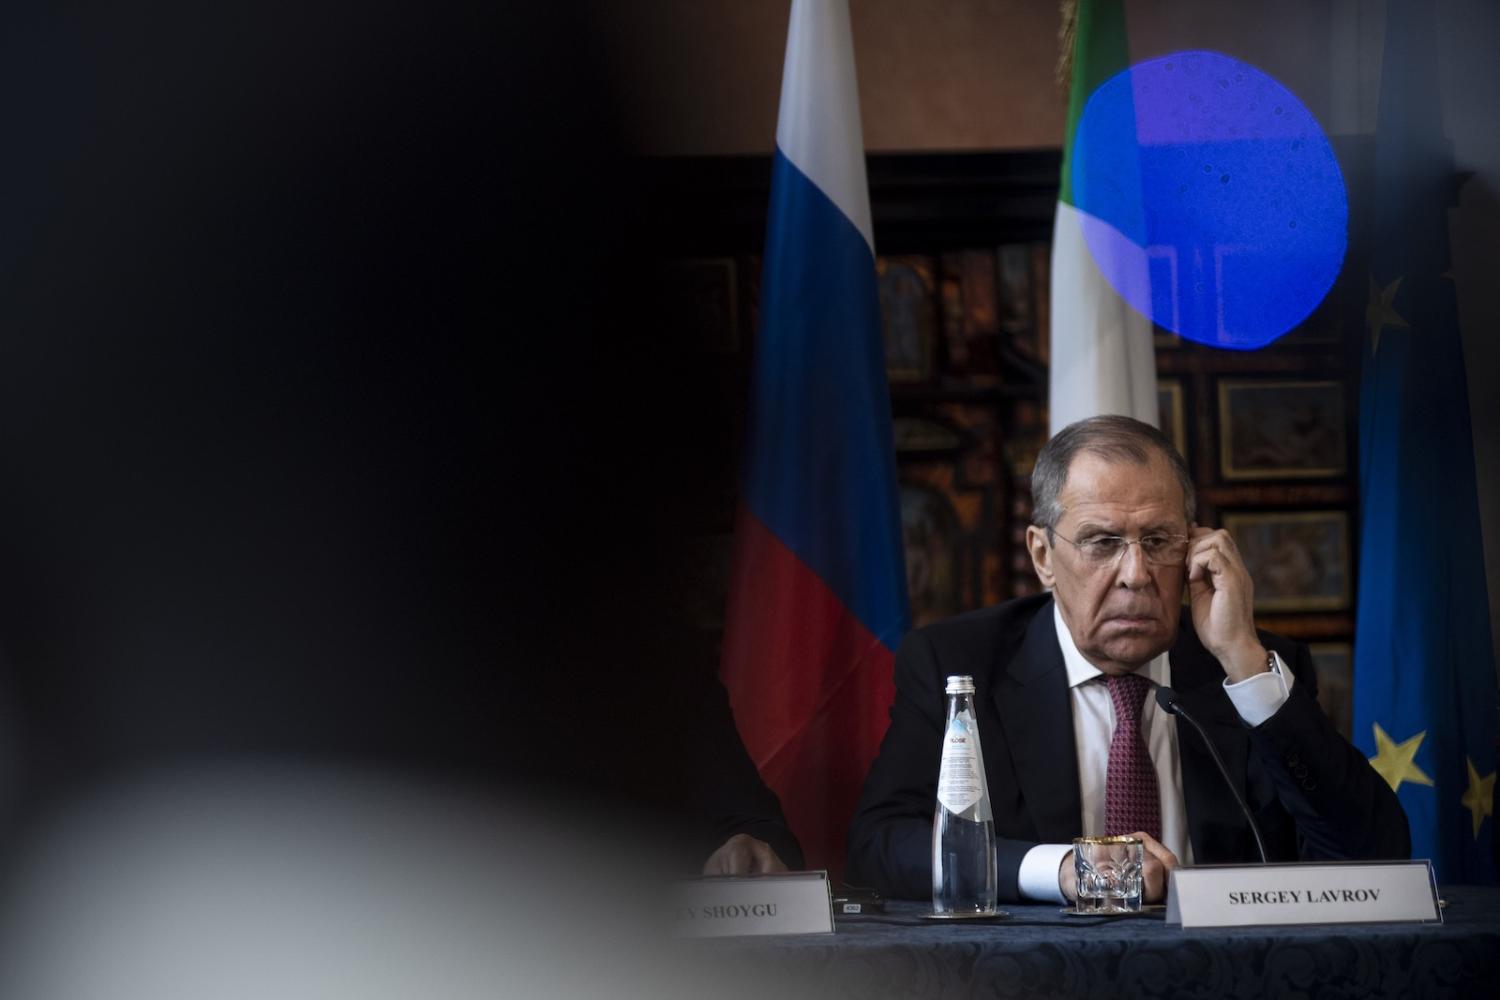 Russian Foreign Minister Sergei Lavrov at a press conference in Rome, February 2020 (Antonio Masiello/Getty Images)